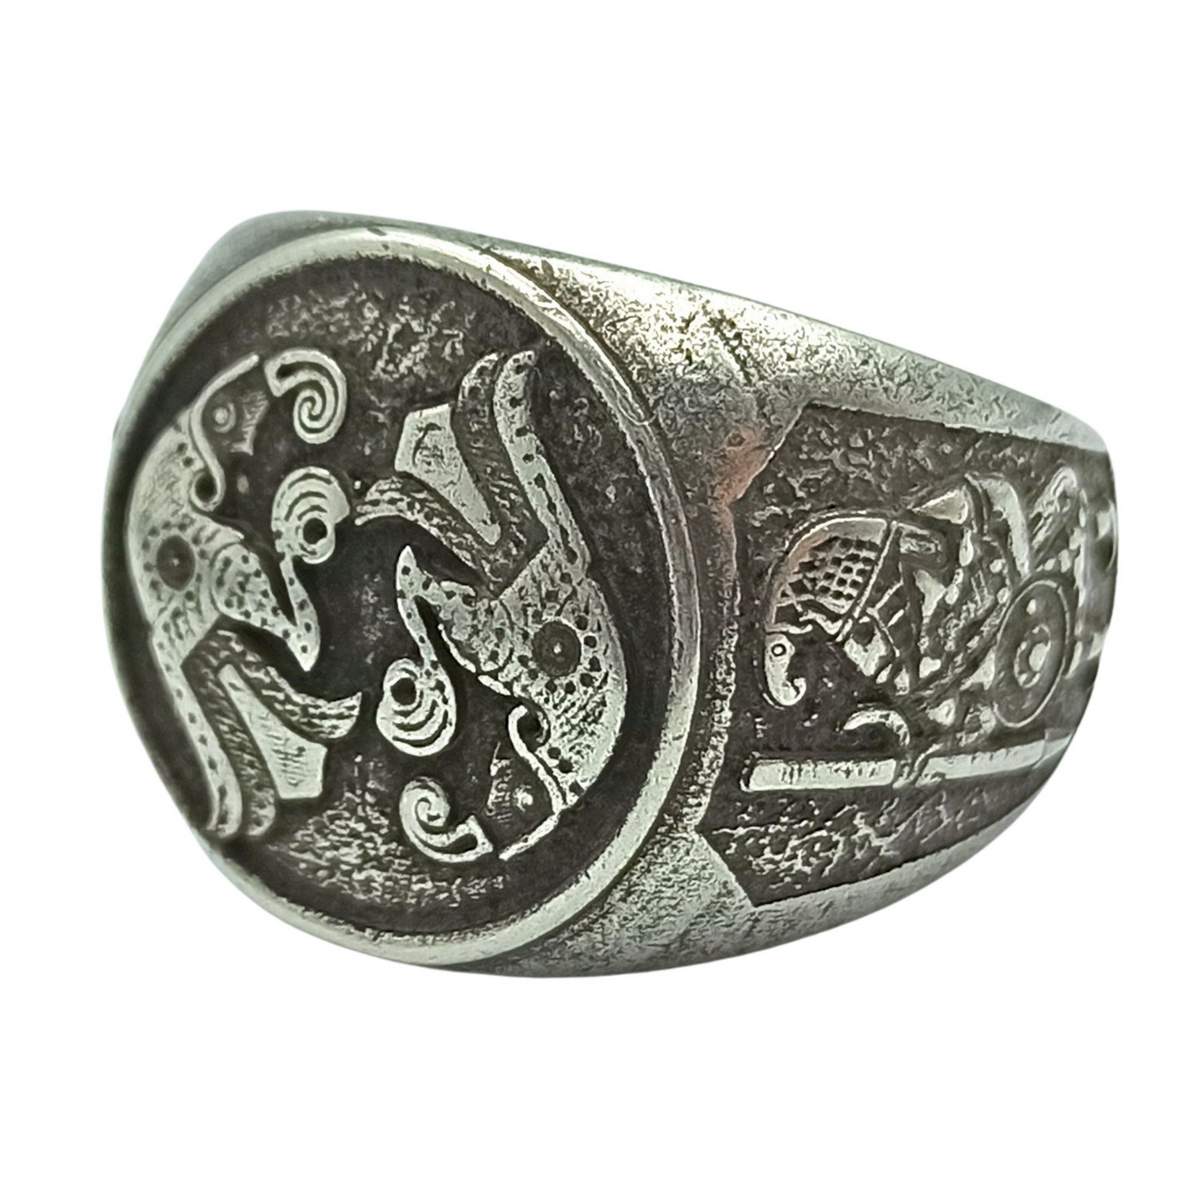 Norse ravens bronze ring 6 US Silver plating 